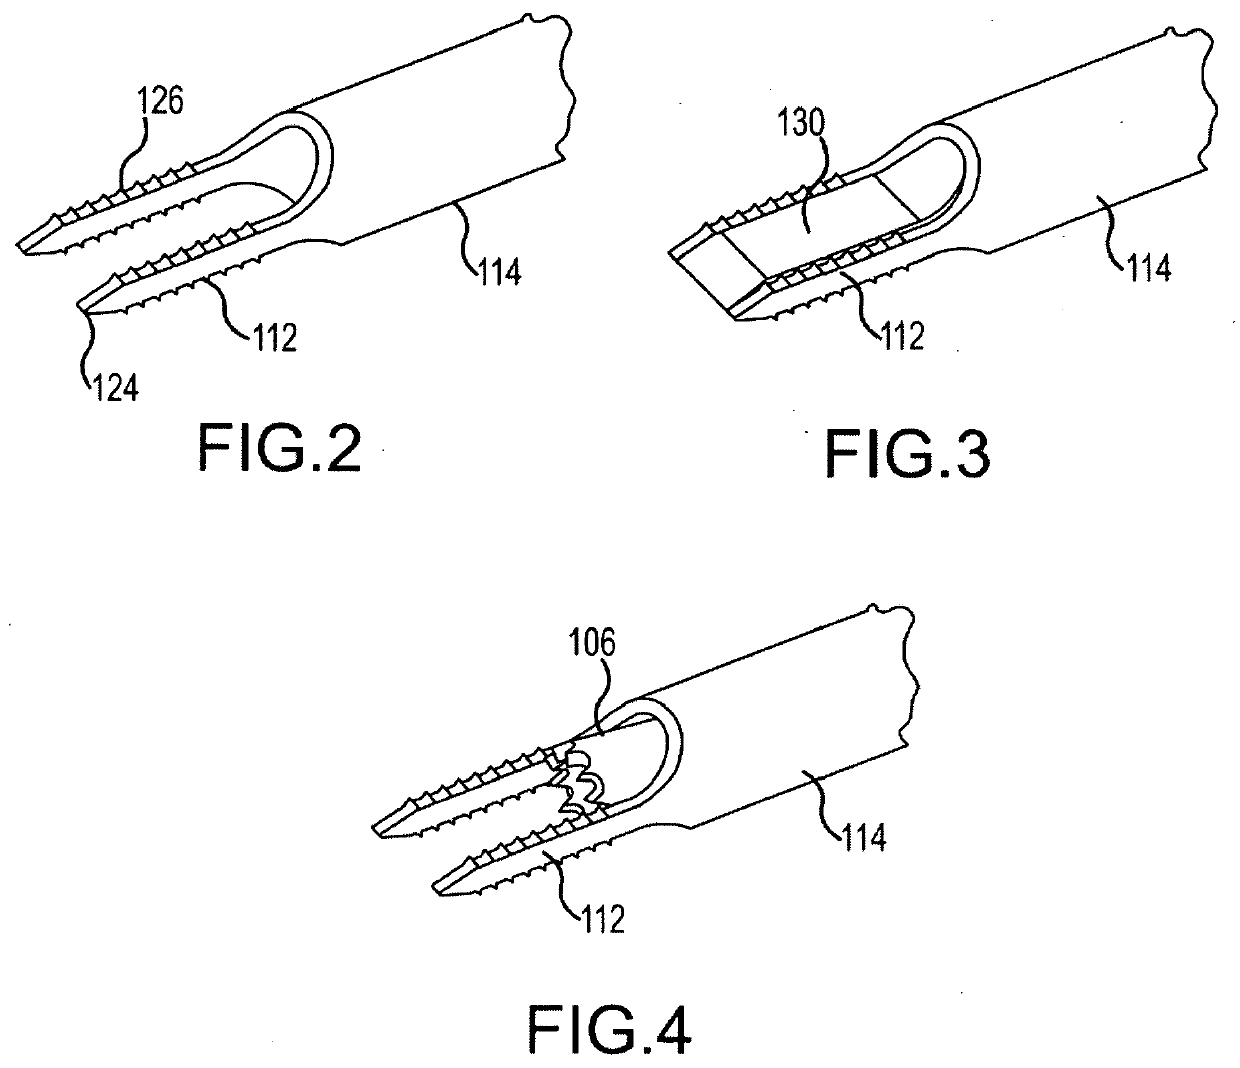 Vertebral joint implants and delivery tools